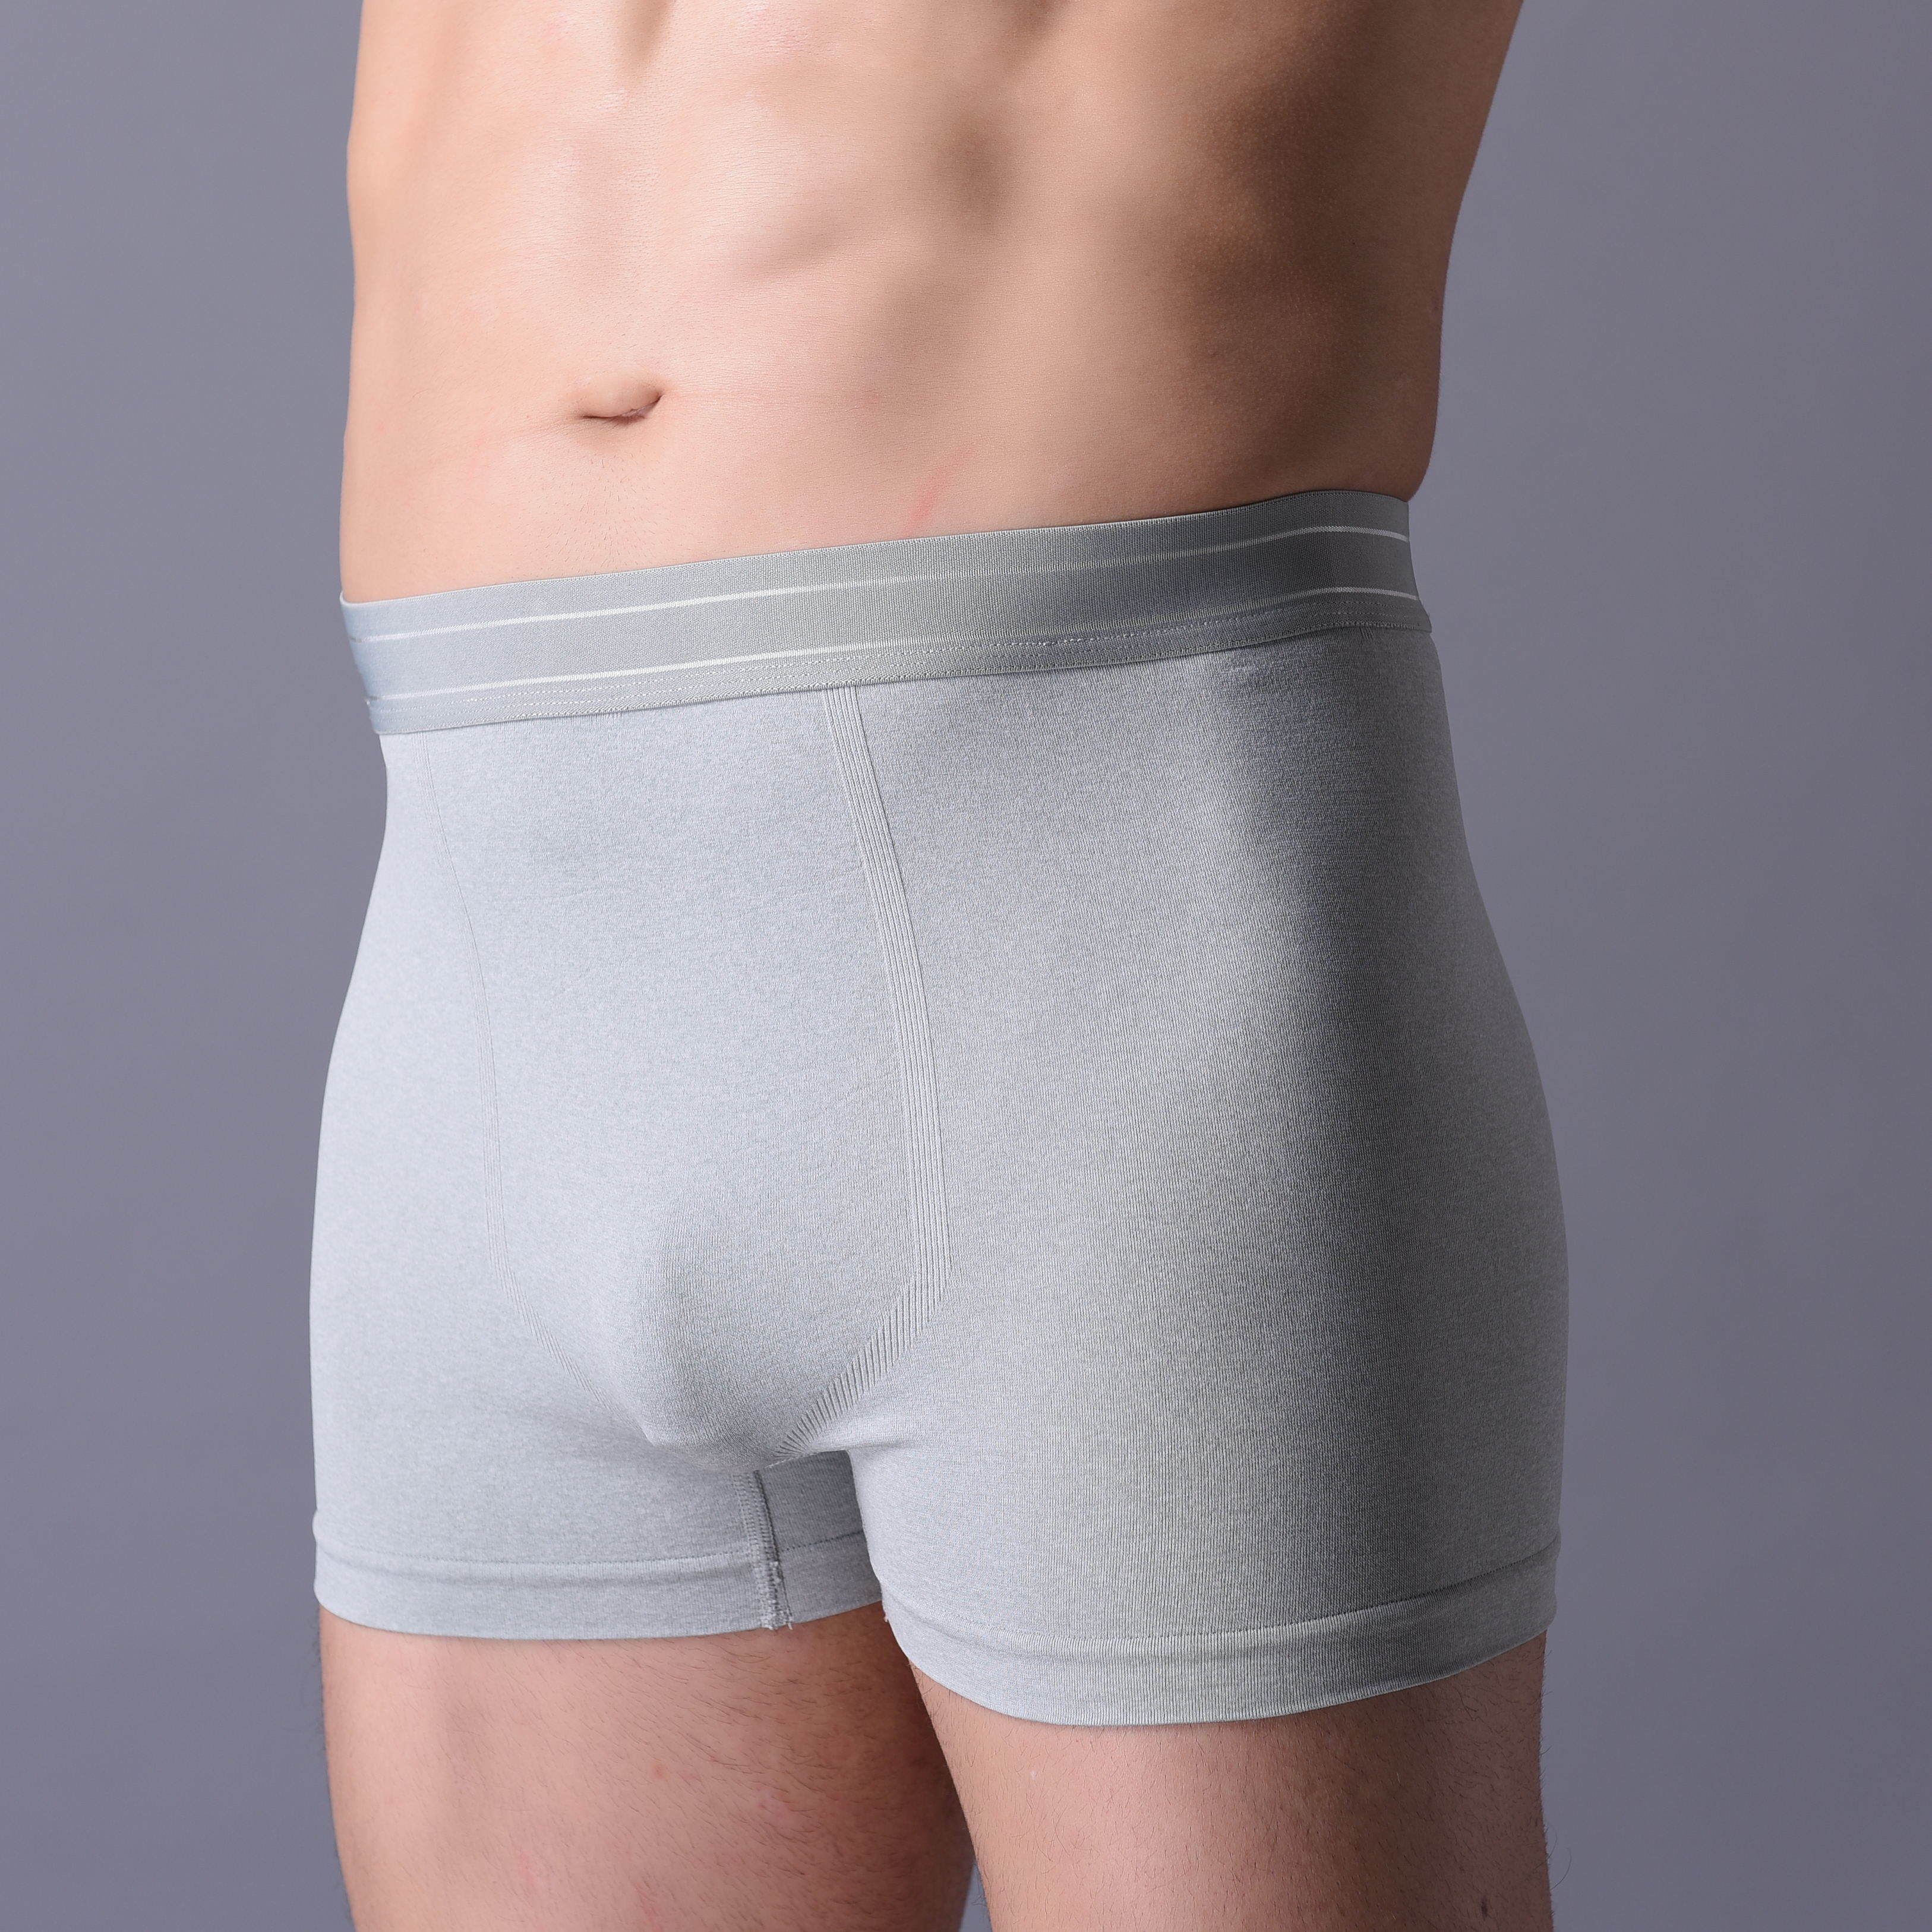 Quality Man boxer,  popular  fitting design,   soft weave  undervest,  XLS003, man shorts.Knitted underwear for sale